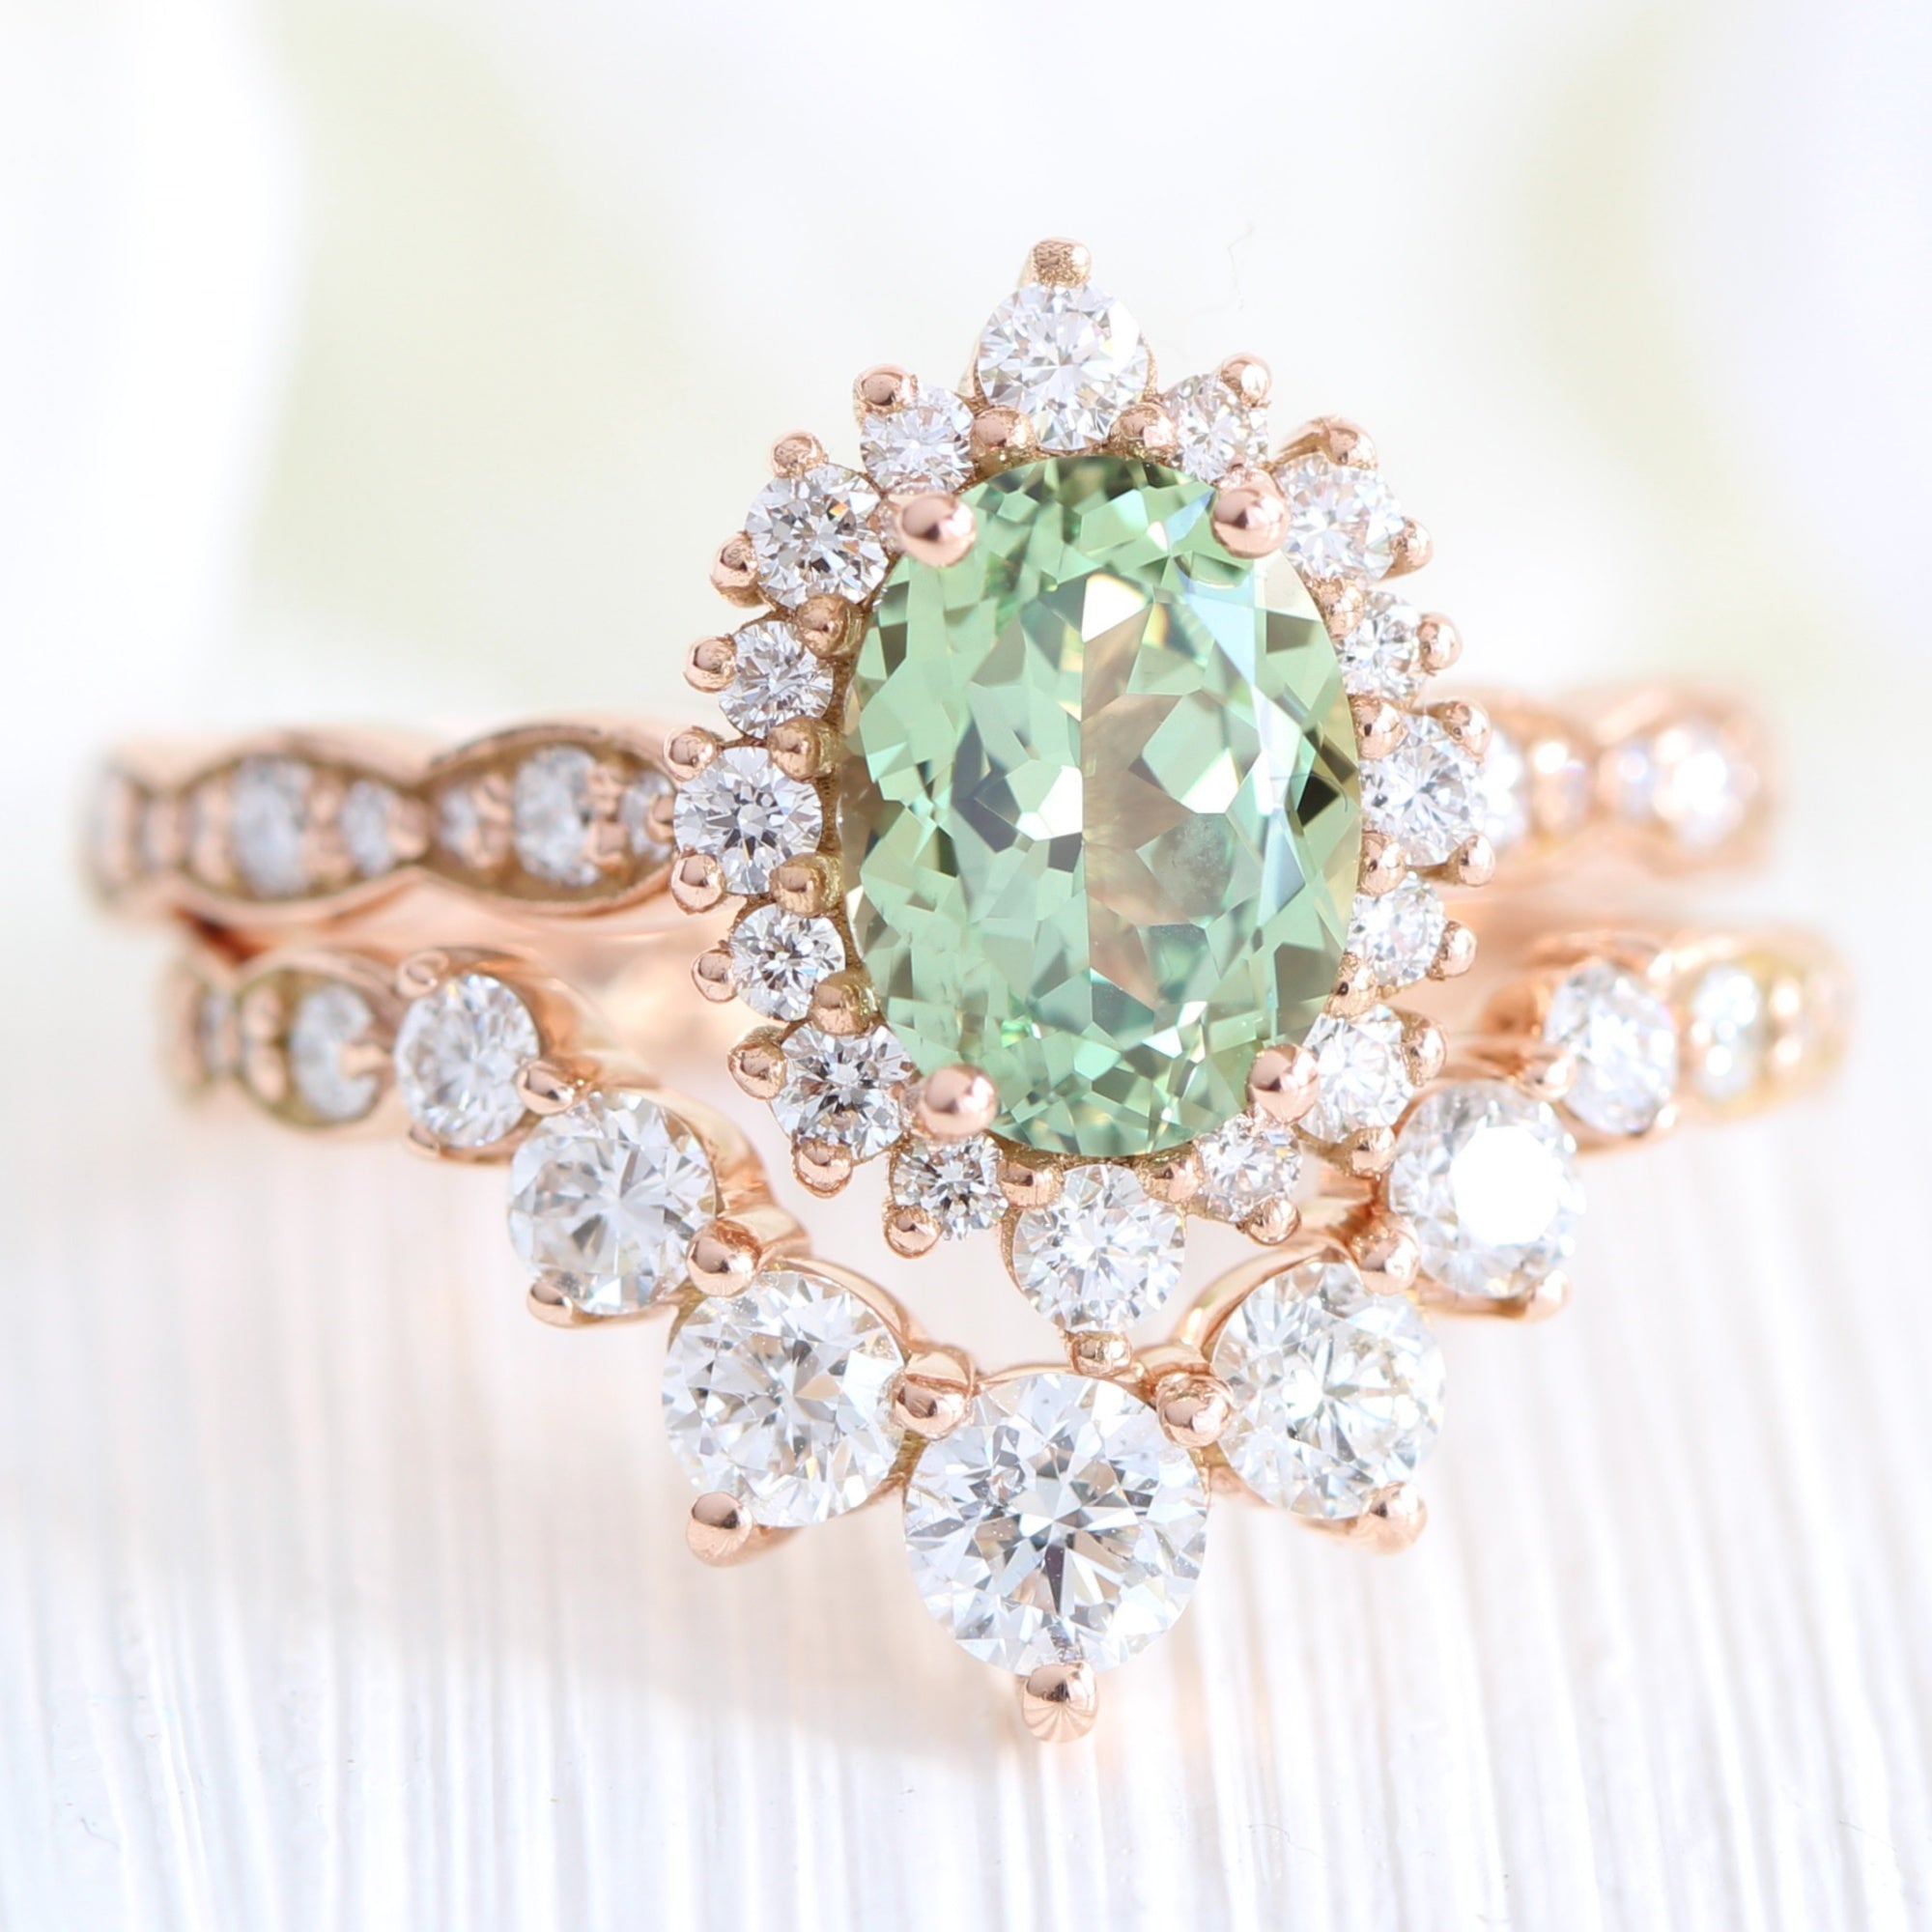 Oval green sapphire ring rose gold deep curved diamond wedding band la more design jewelry